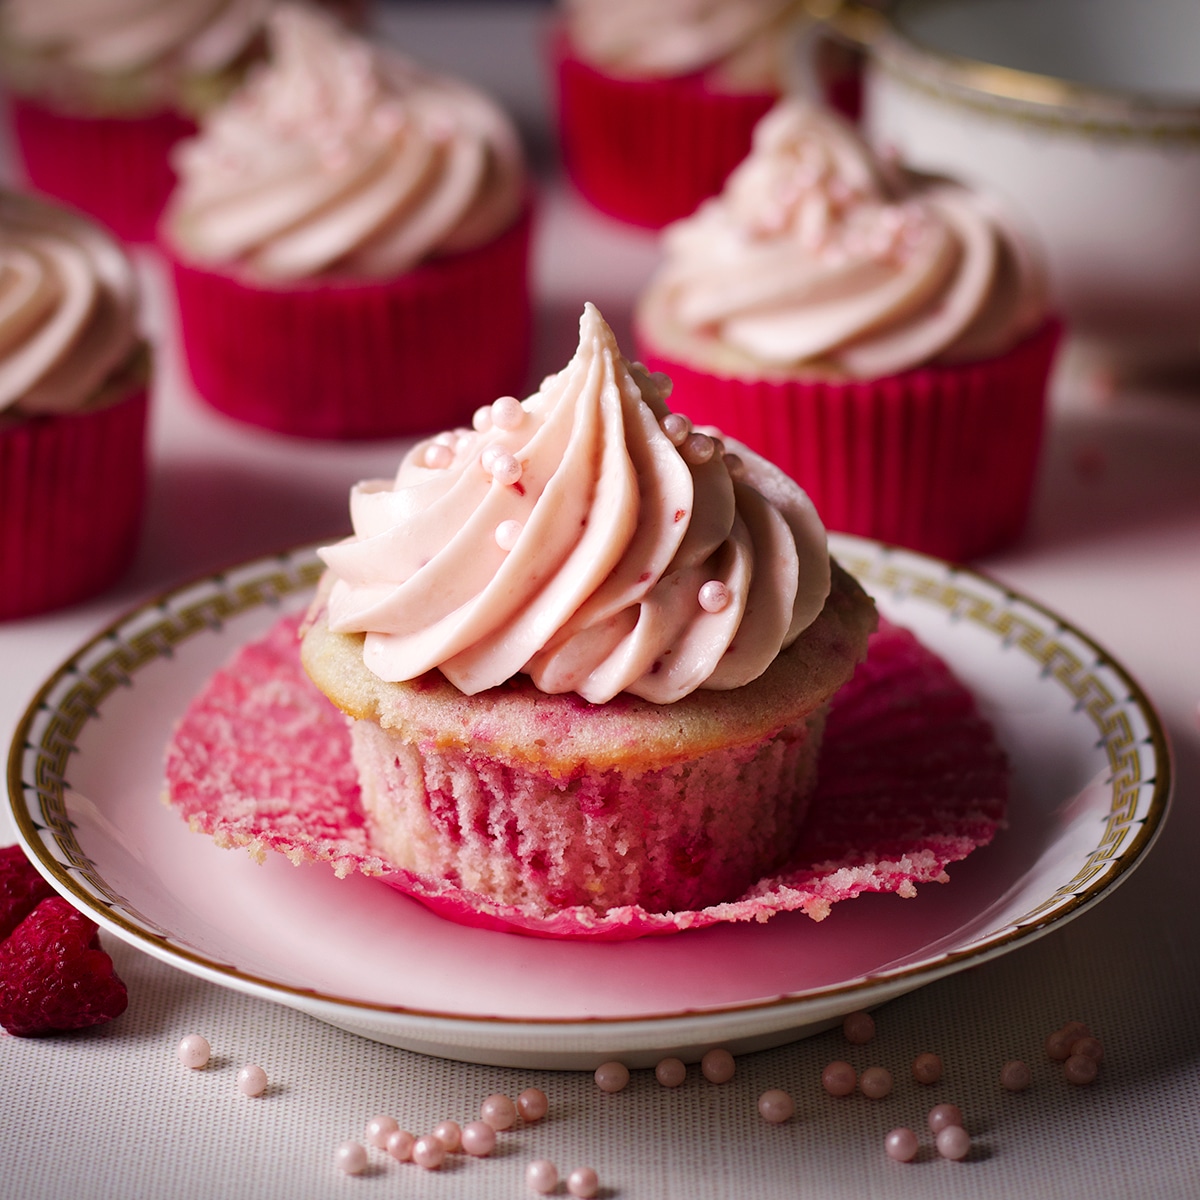 A raspberry cupcake on a dessert plate with several other cupcakes resting on the table behind it.